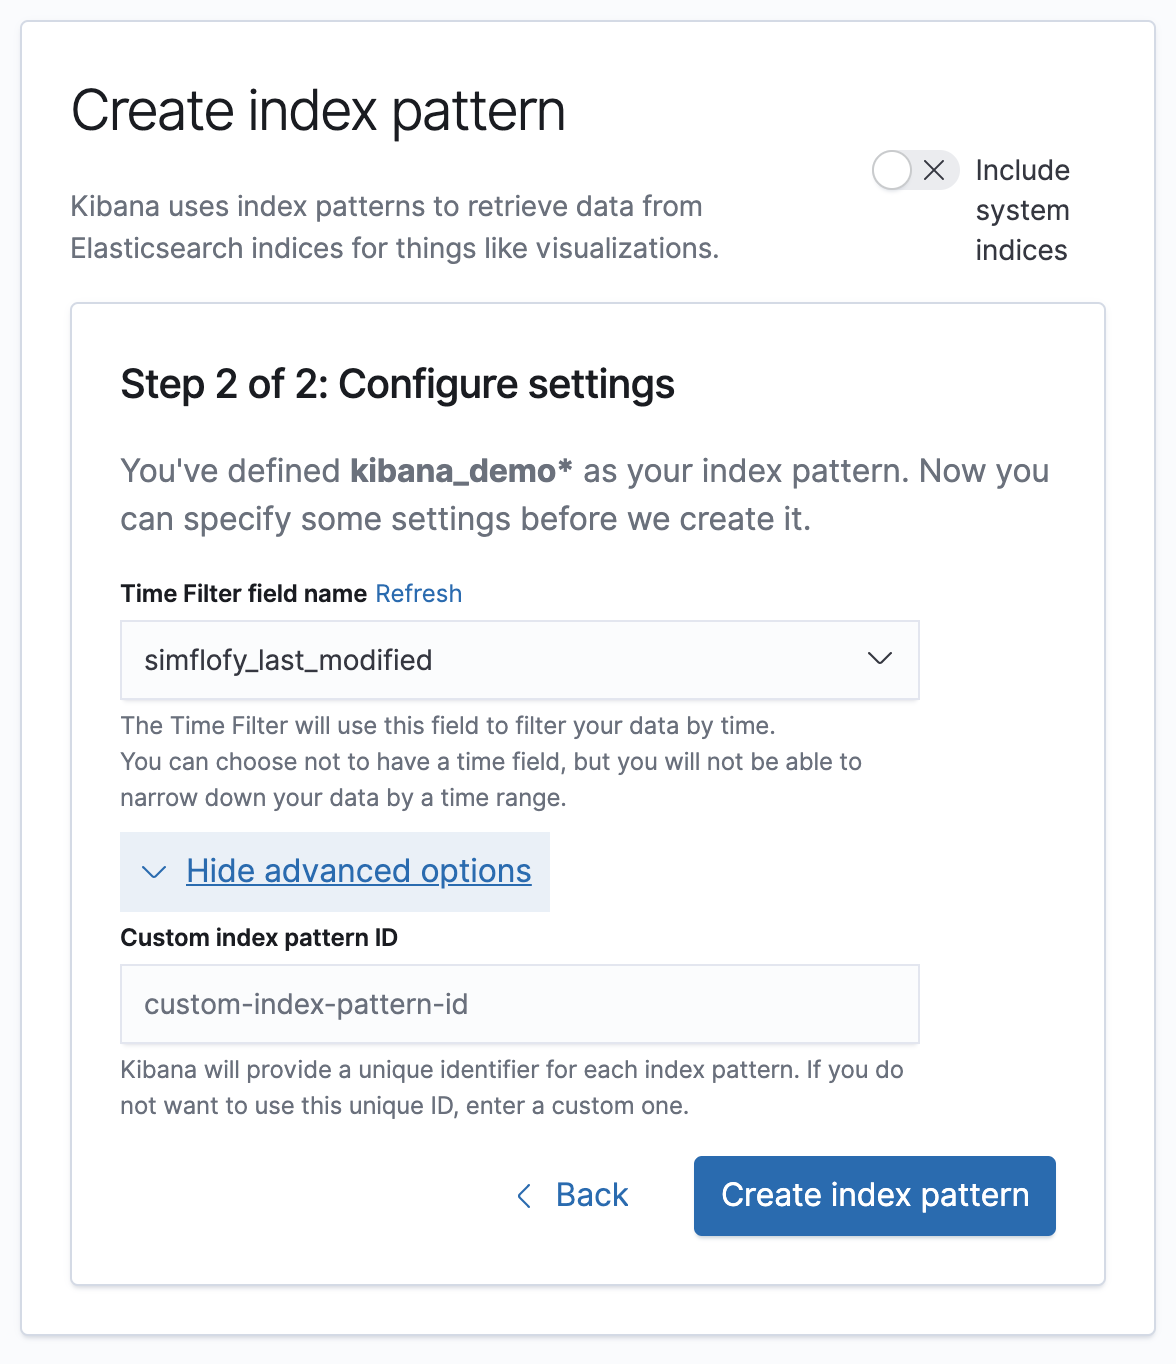 Configure Index Pattern Settings